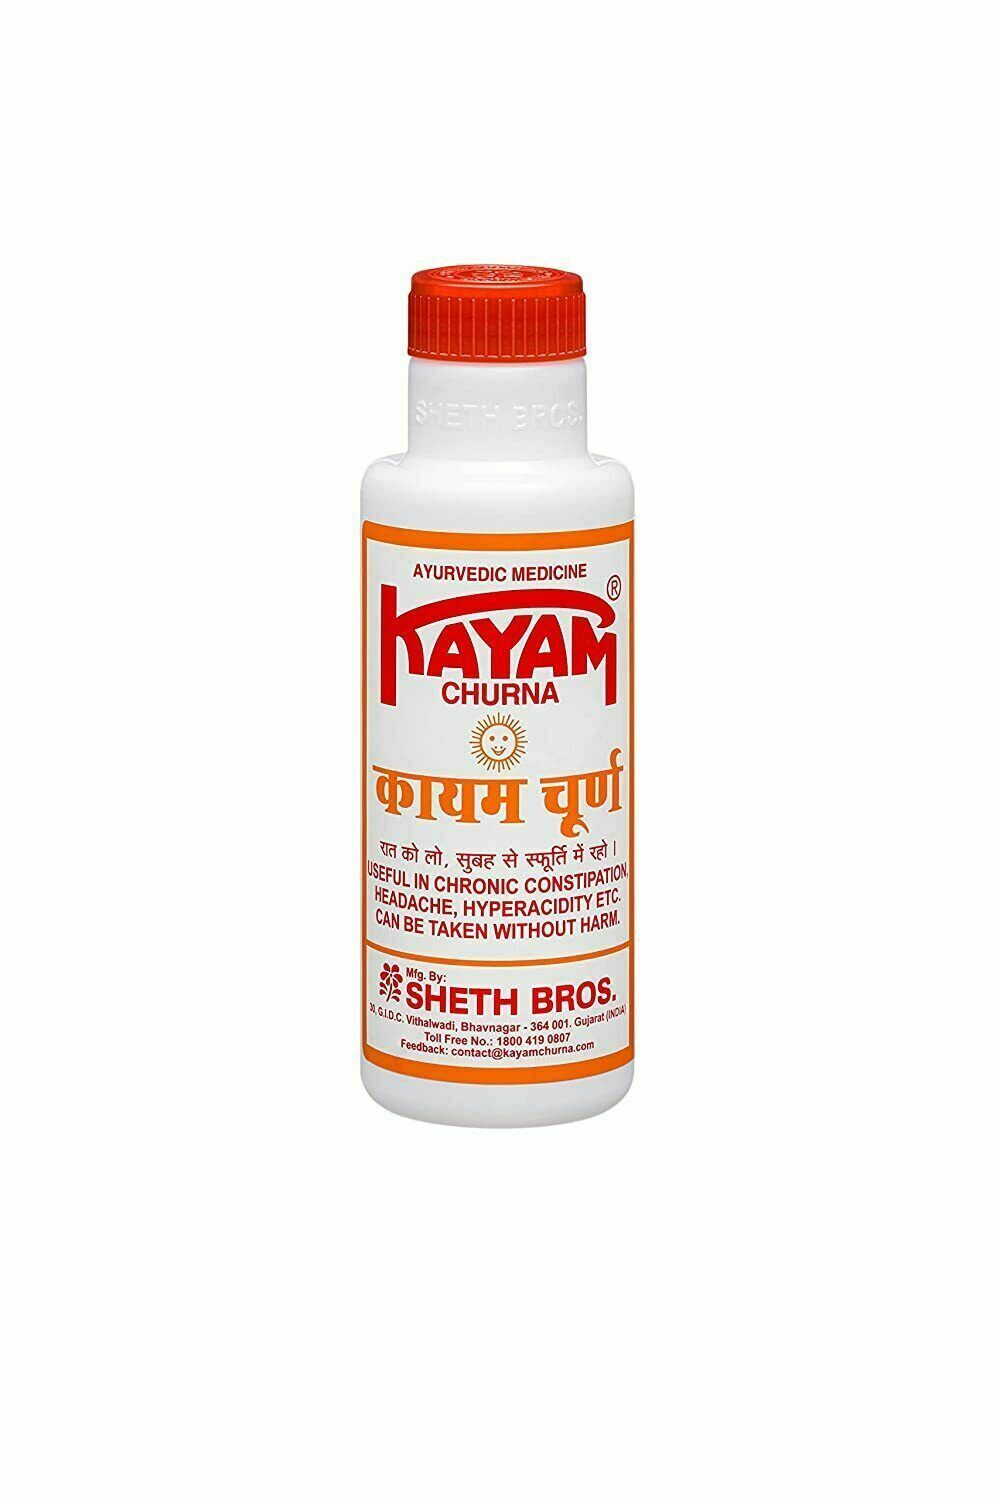 Ayurvedic Kayam Churna For Constipation Digestion Acidity, 100gm (Pack of 1)